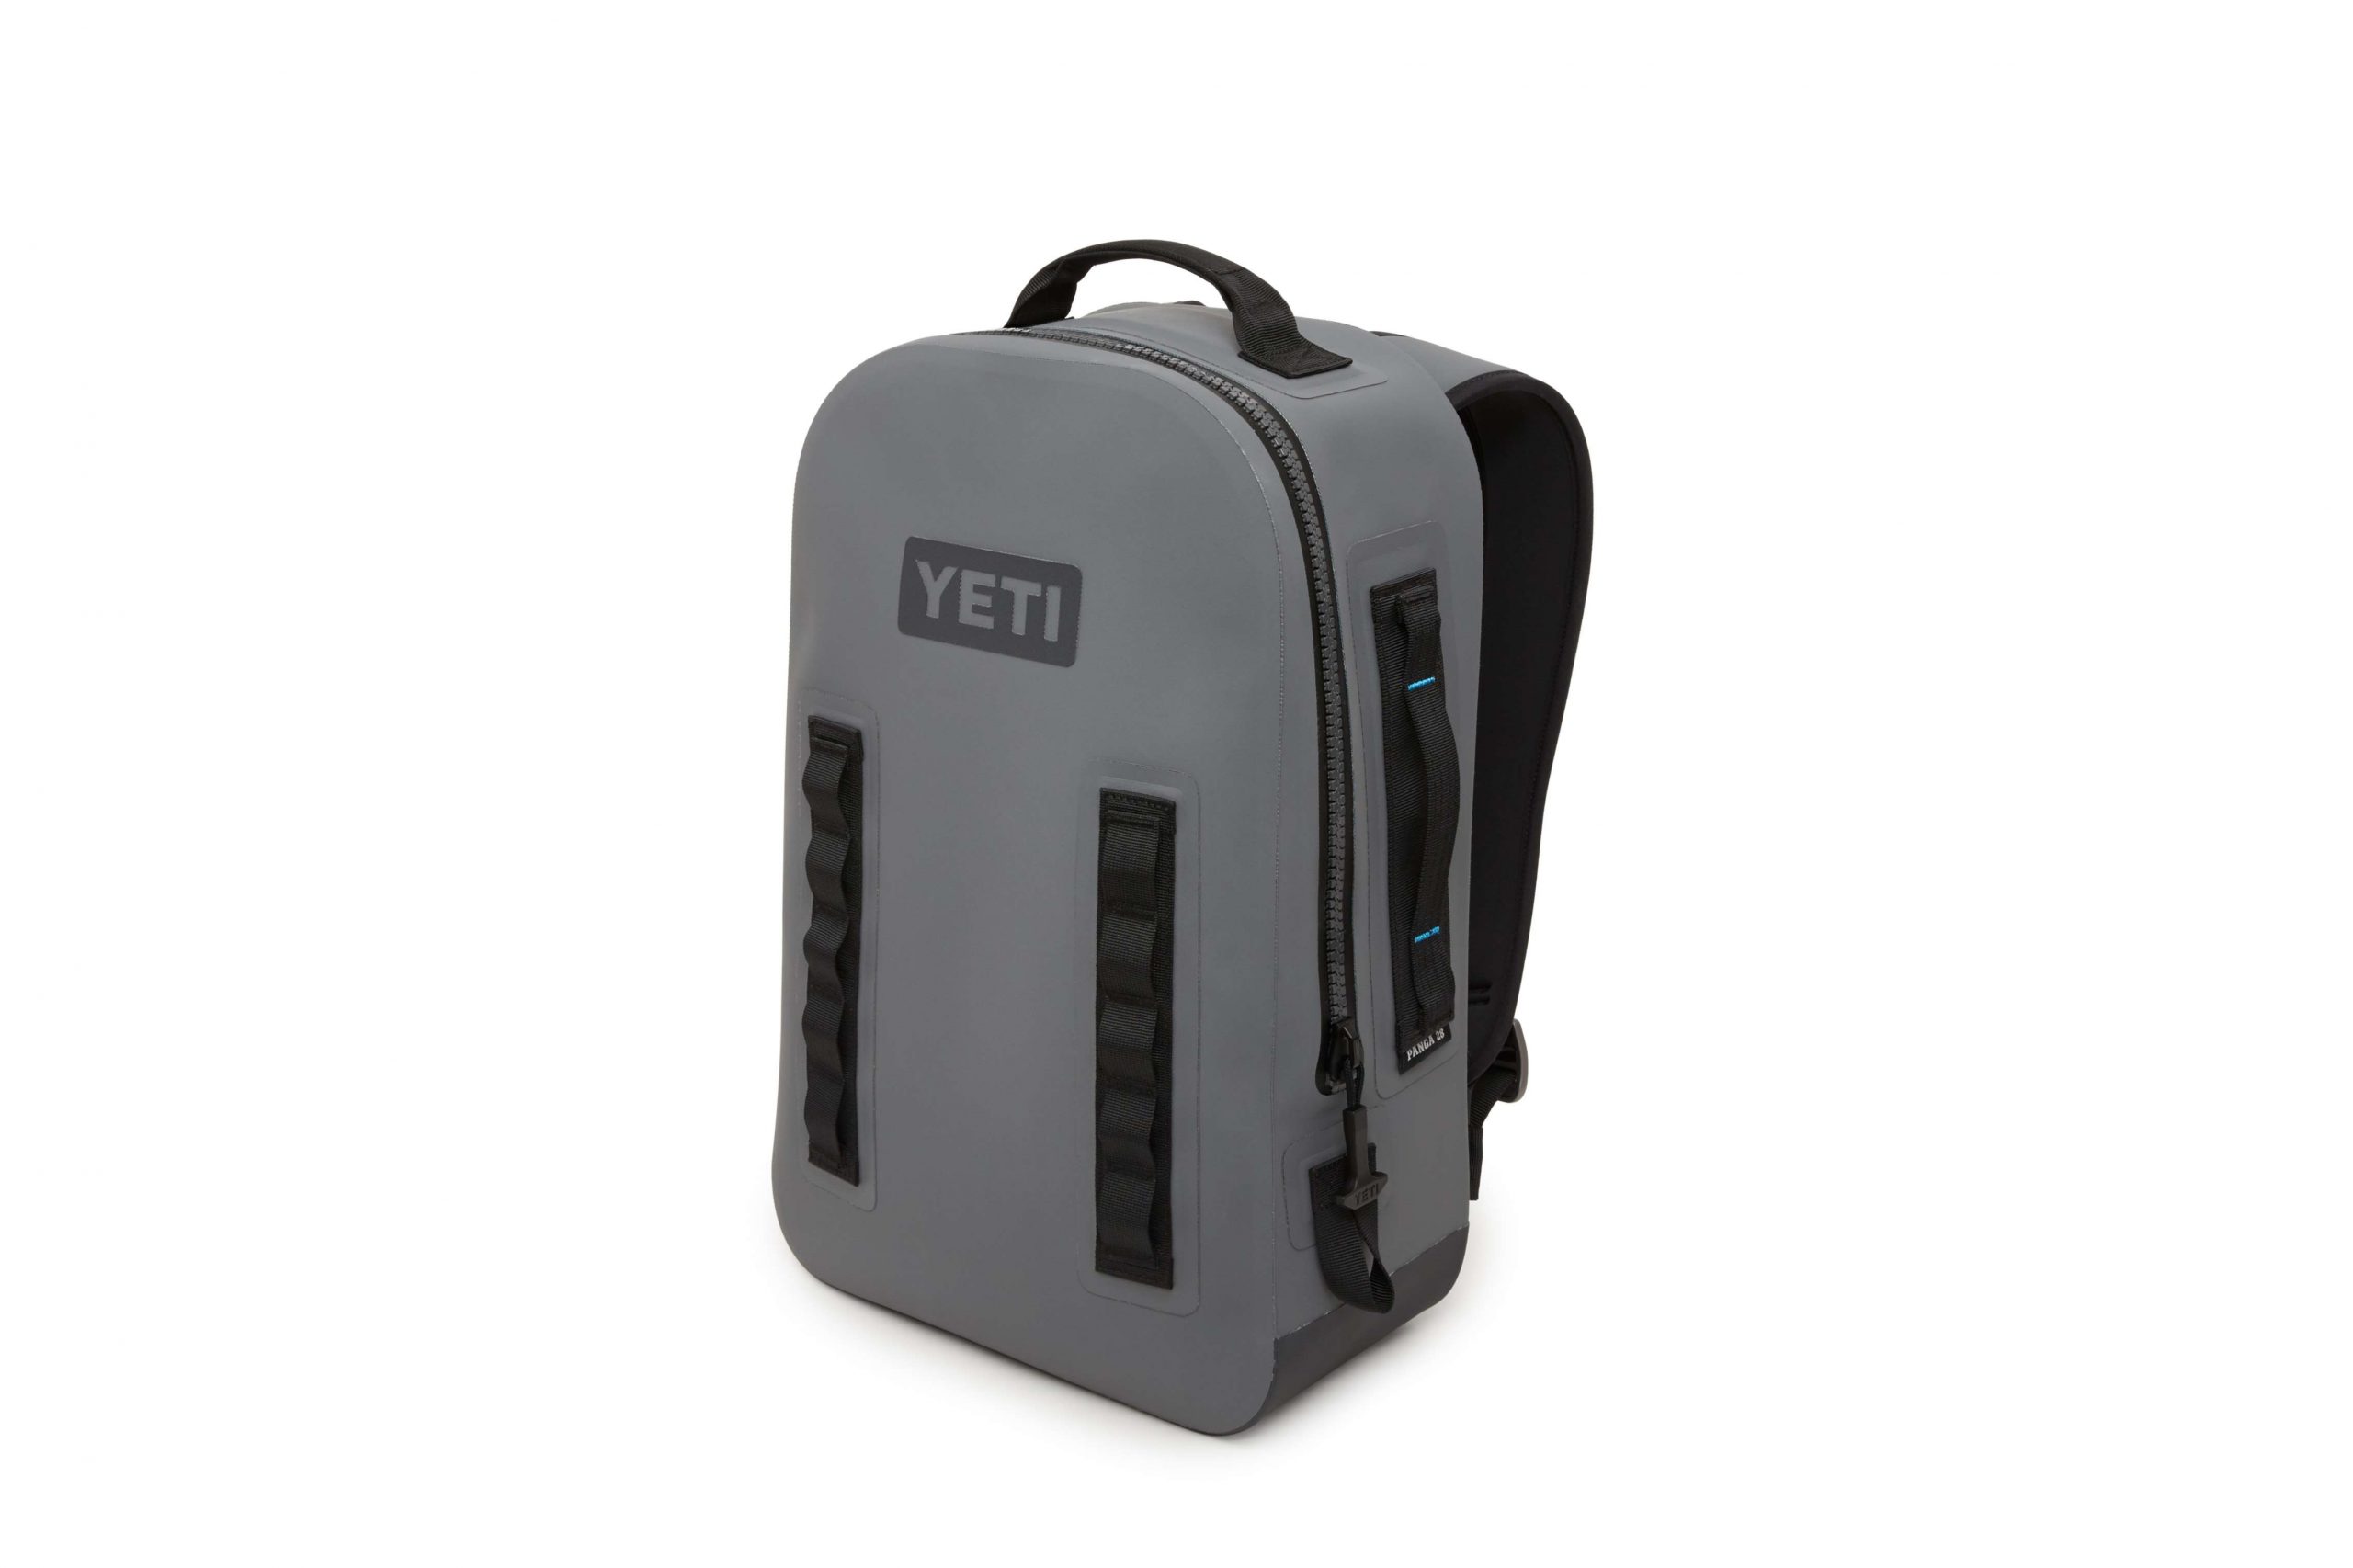 Panga Backpack 28<br>	
Yeti<br>
$299.99<br>	
The Panga Backpack is an airtight citadel merging the durability of the Panga Duffel with a tried-and-true backpack design. Its ergonomic DryHaul Shoulder Straps offer extra carrying comfort, while the removable chest straps and waist belt provide added stability and security while you trek. And no need to carry it over your head while you wade or blink an eye if left out in the rain, because it's a 100 percent waterproof gear fortress equipped to outperform any other backpack out there.
